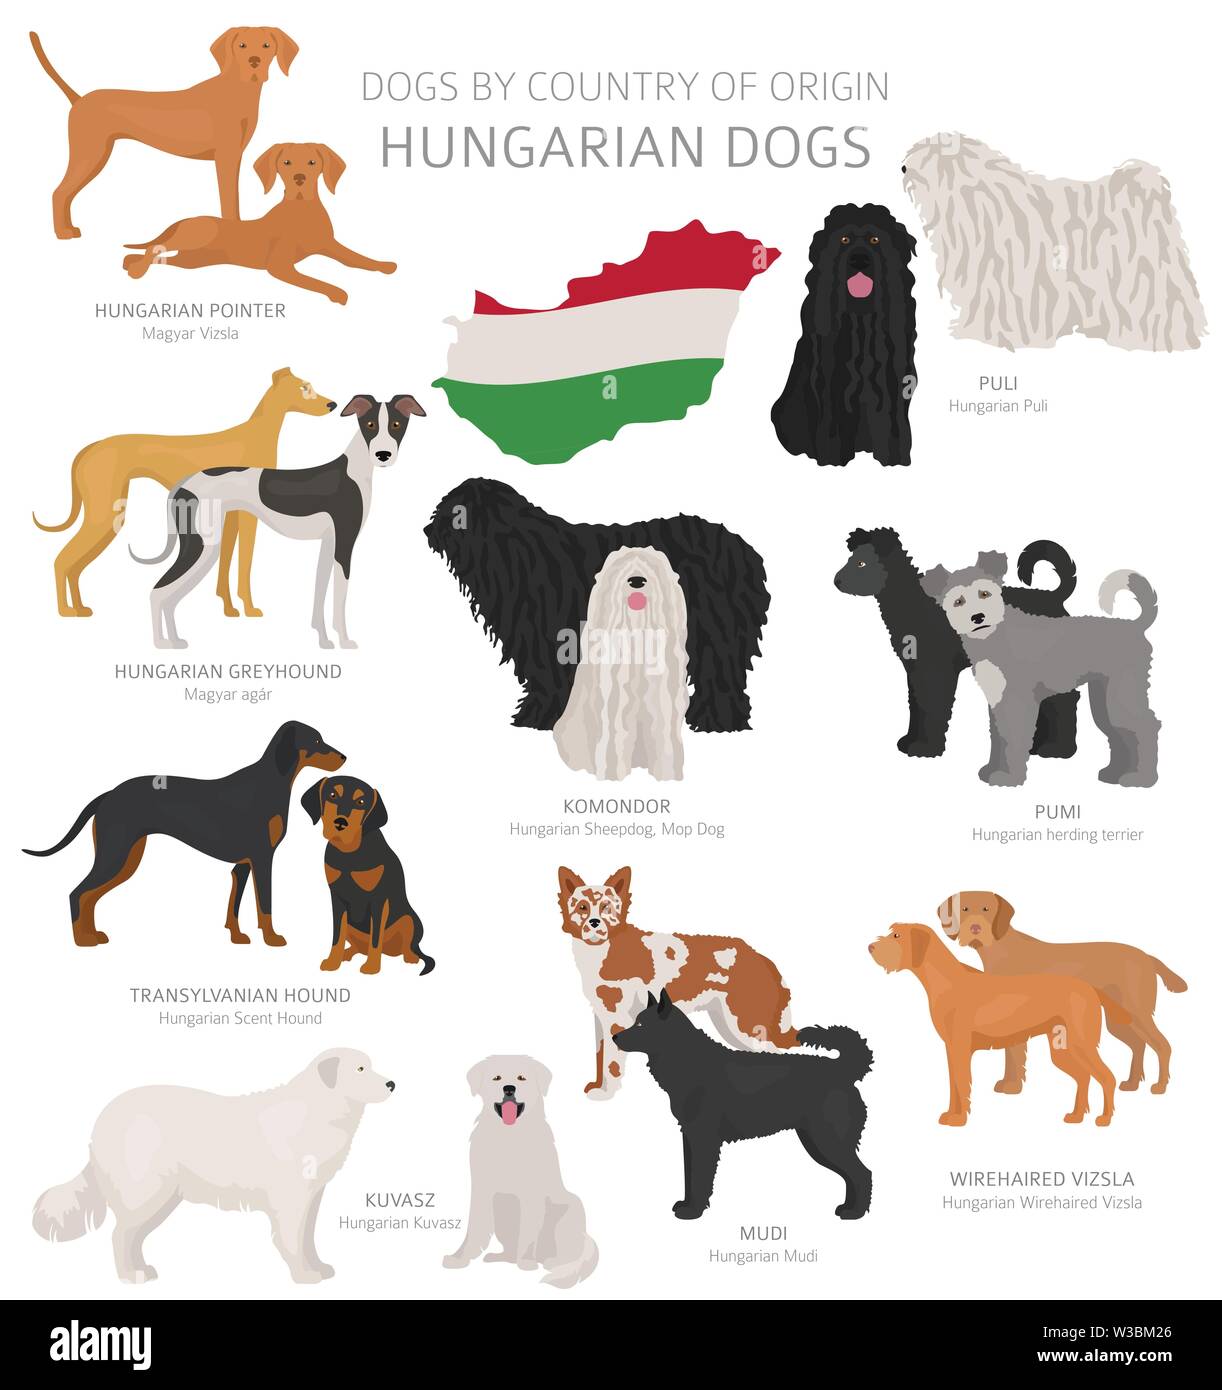 Dogs by country of origin. Hungarian dog breeds. Shepherds, hunting, herding, toy, working and service dogs  set.  Vector illustration Stock Vector